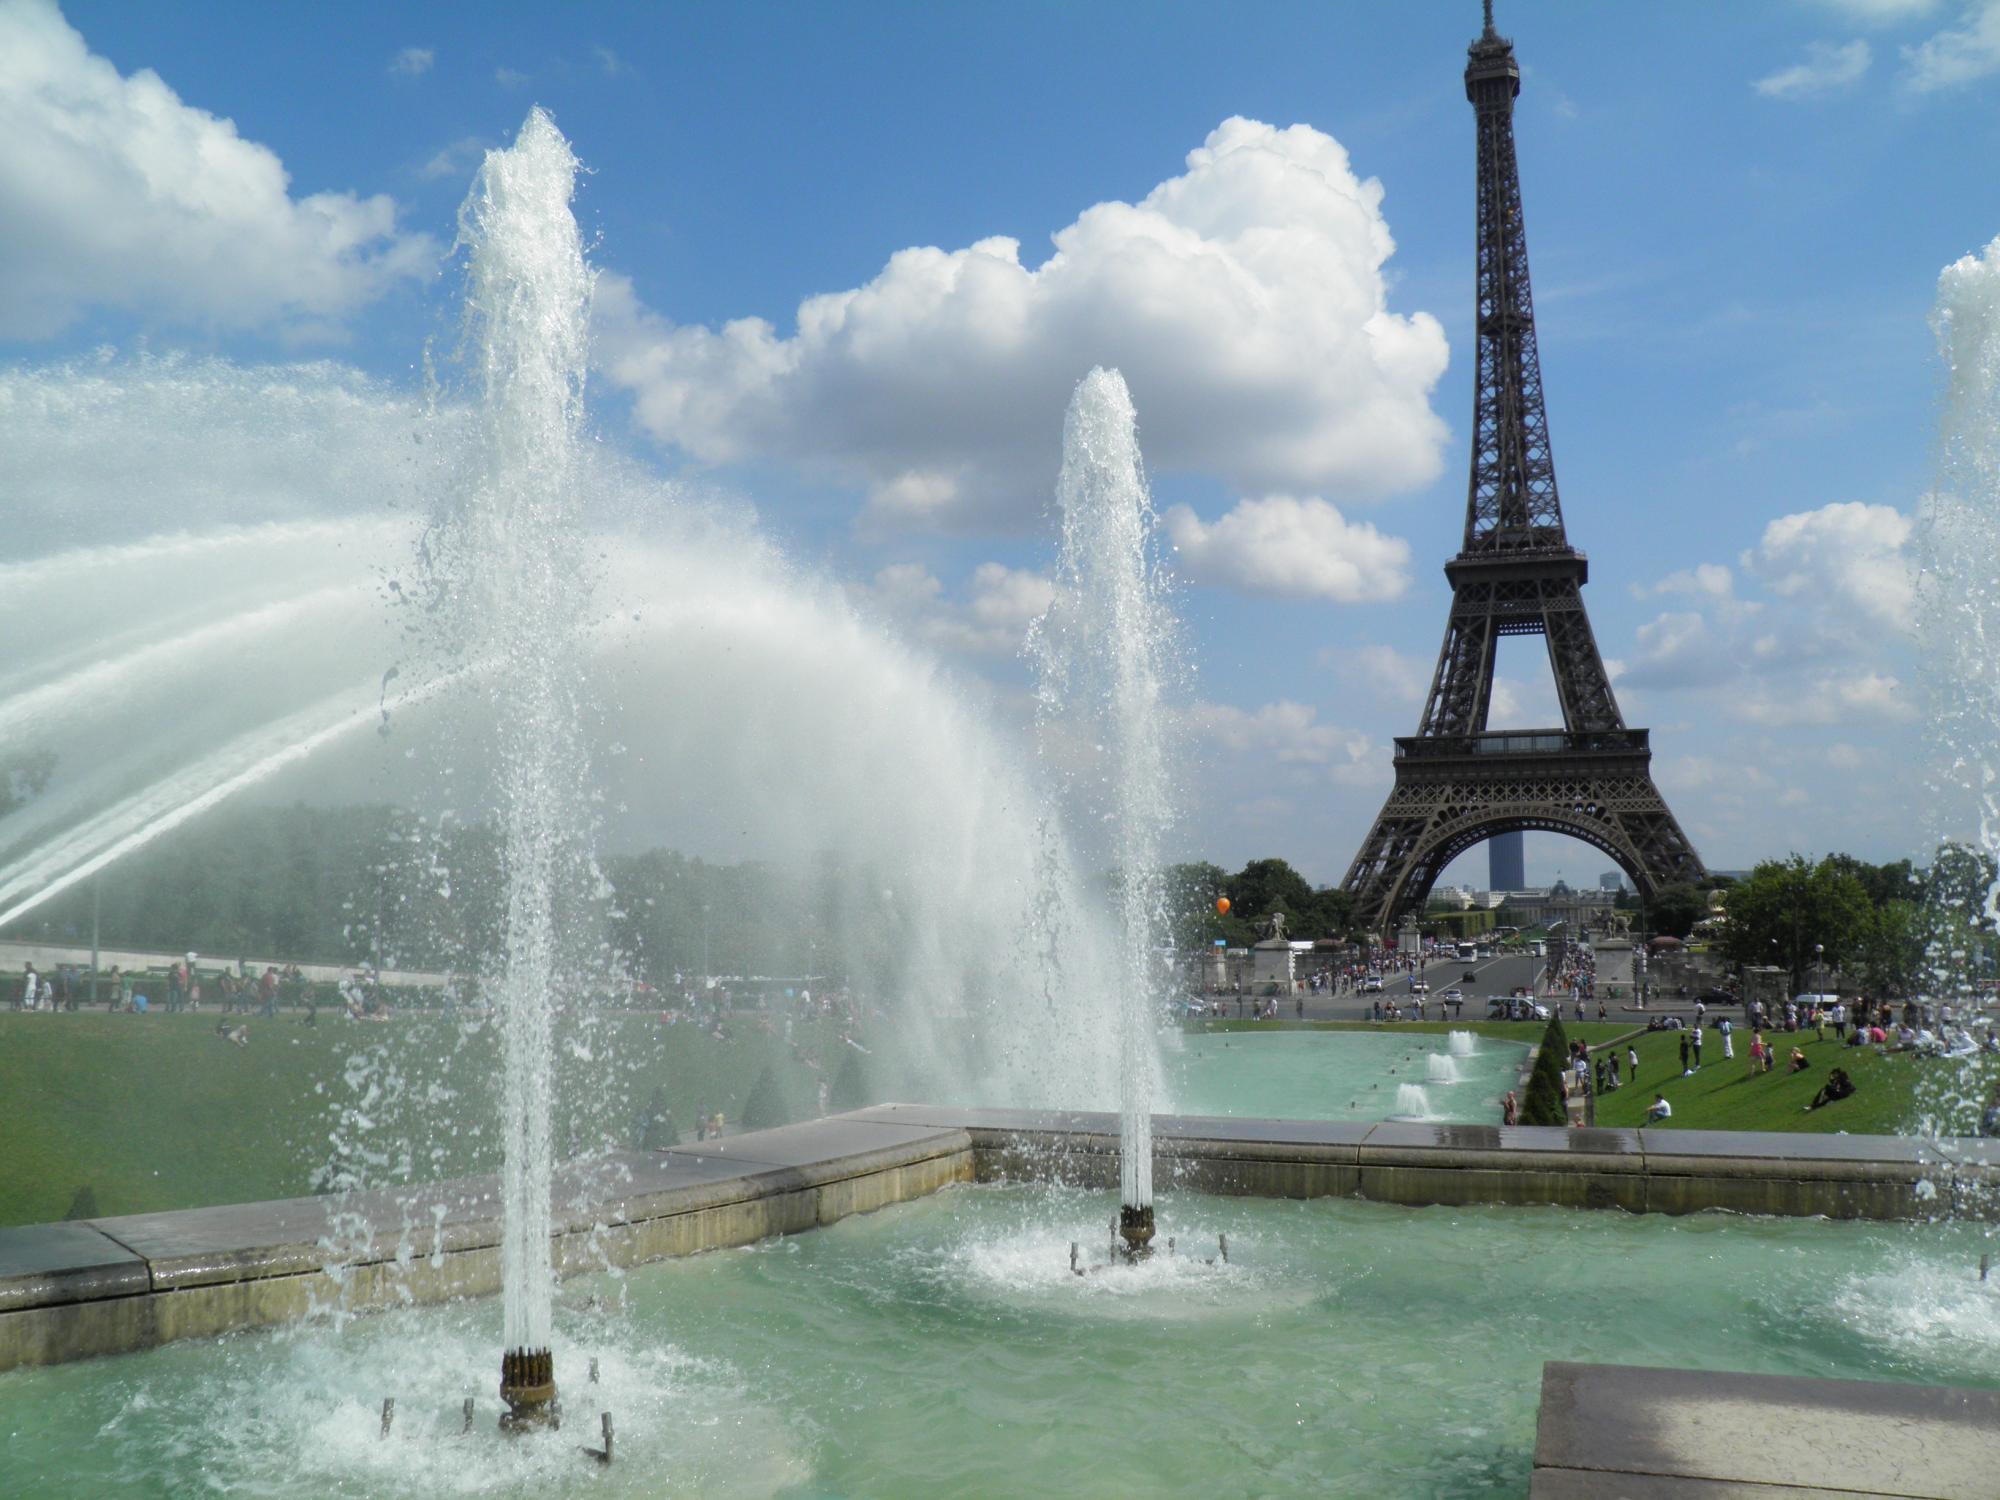 Discover Paris - Vacation package : France Coast to Coast  - Land of France, travel agency in France